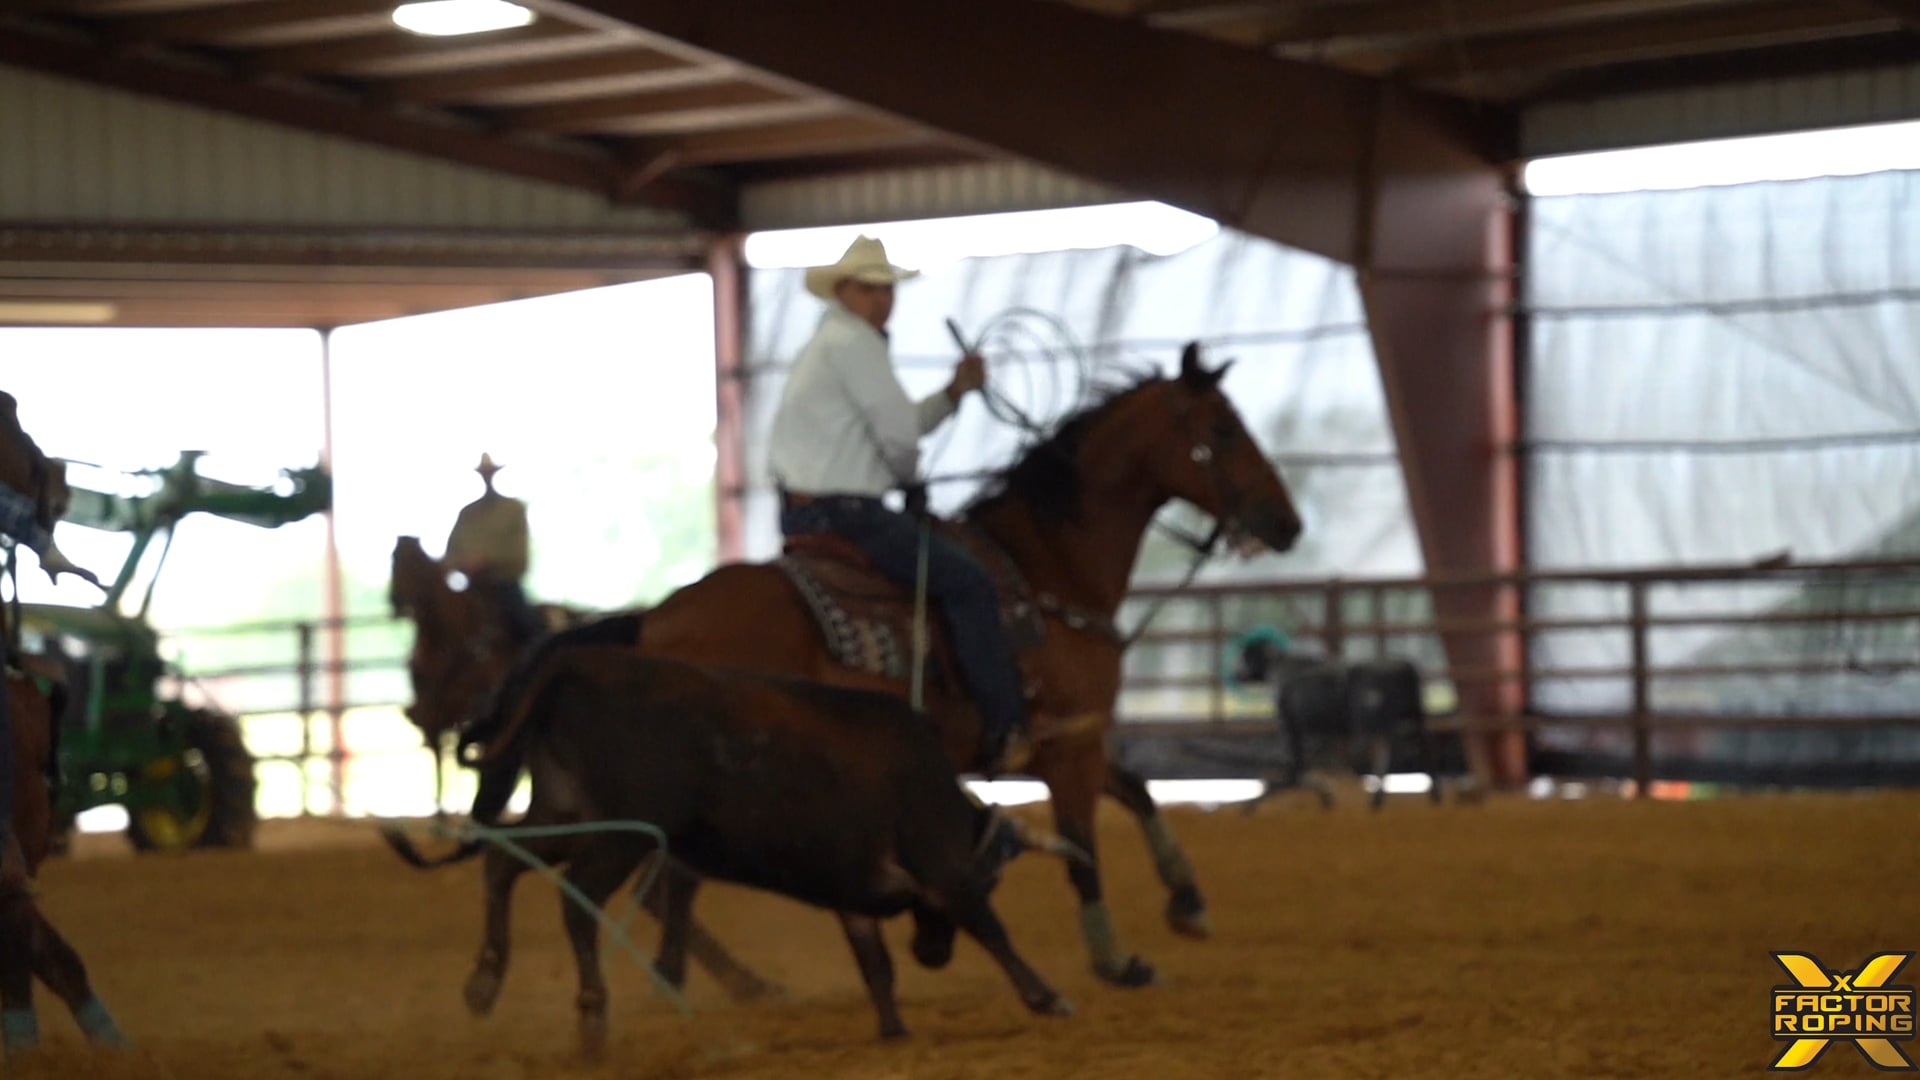 FREE Getting The Most Out Of A Practice For You and Your Horse with Erich Rogers